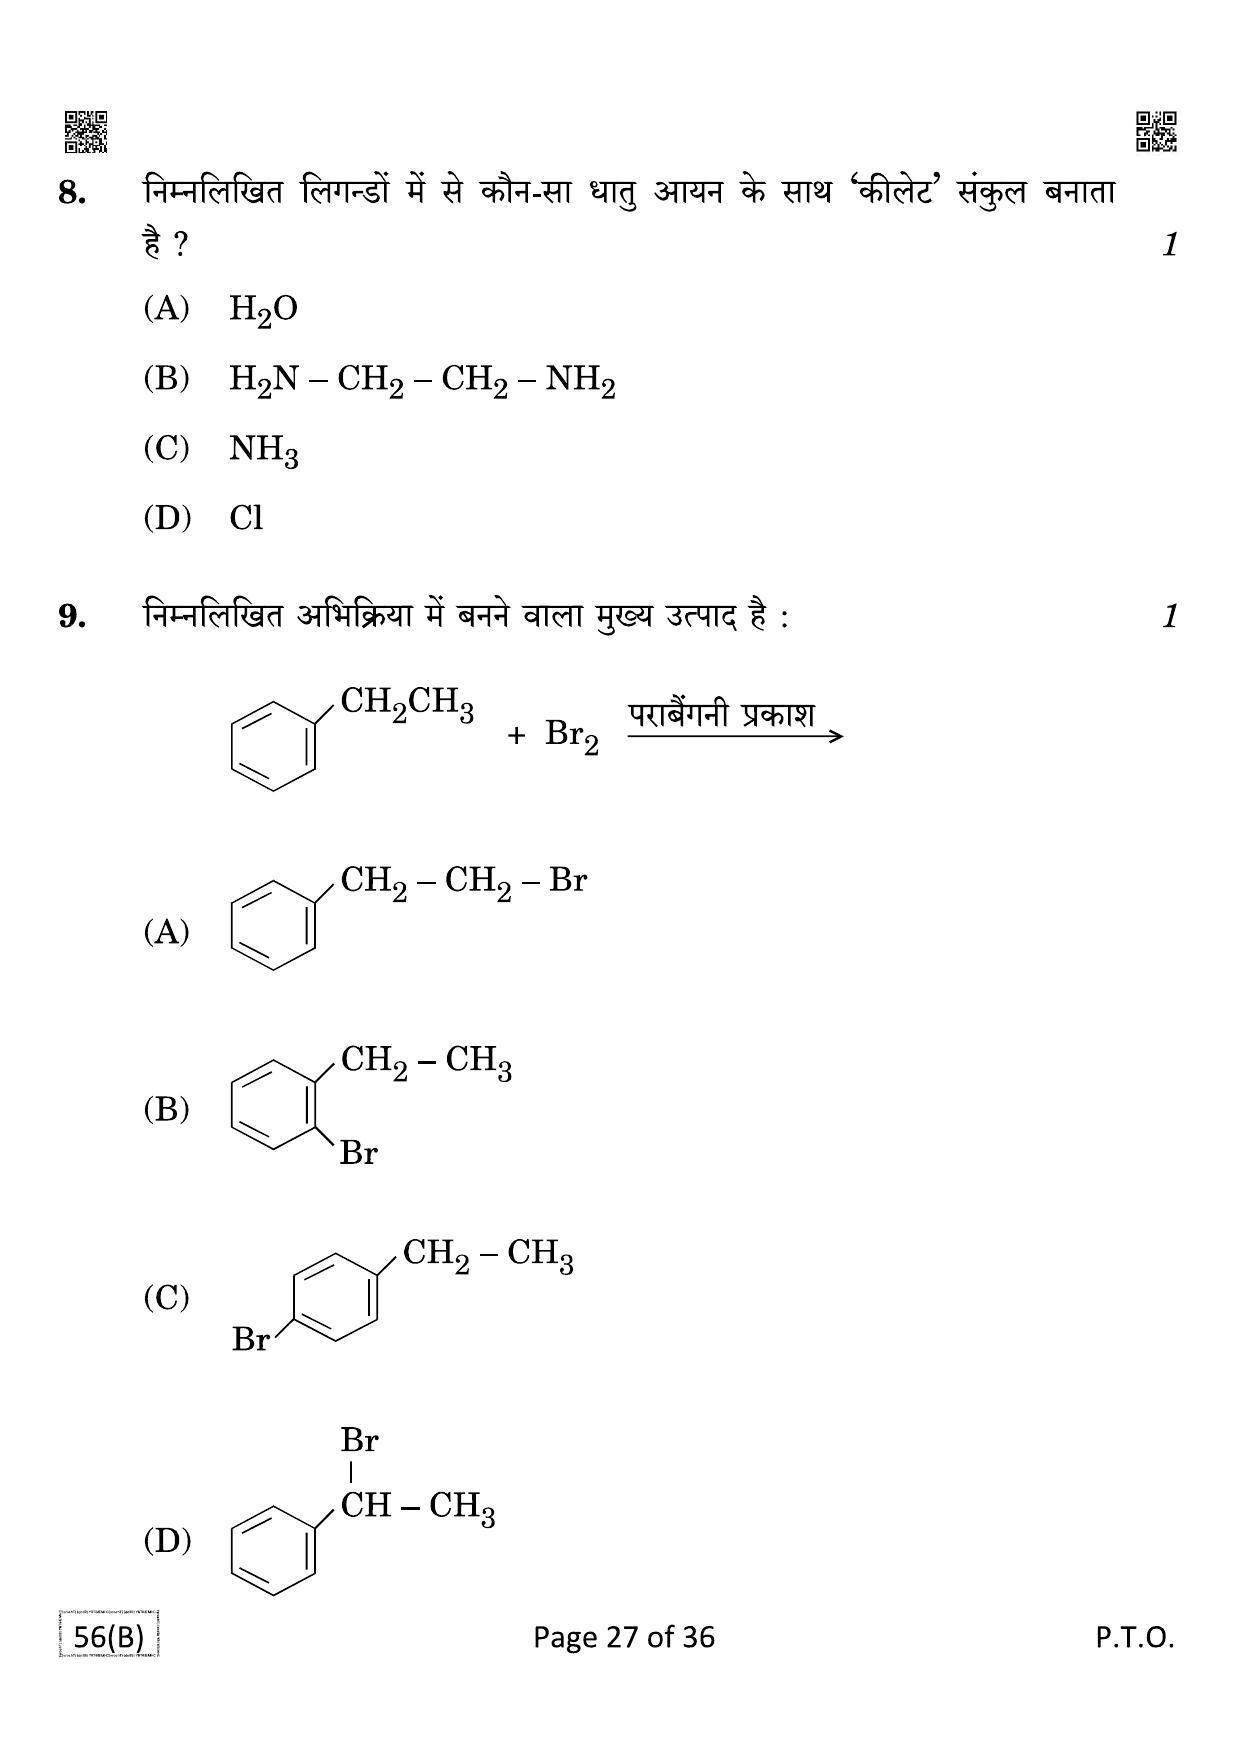 CBSE Class 12 QP_043_CHEMISTRY_FOR_BLIND_CANDIDATES 2021 Compartment Question Paper - Page 27